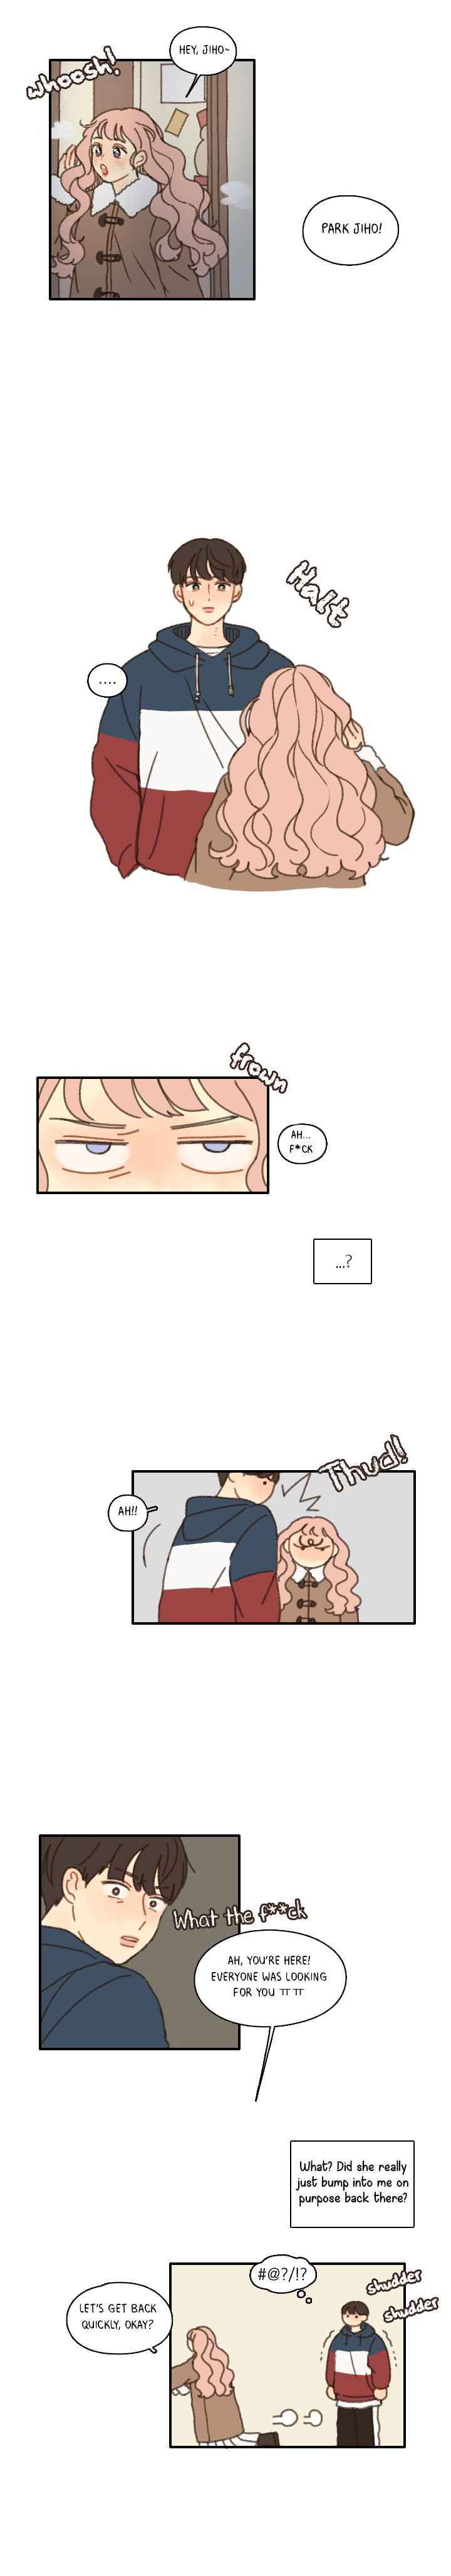 Don't Forget That I Like You Vol. 1 Ch. 1